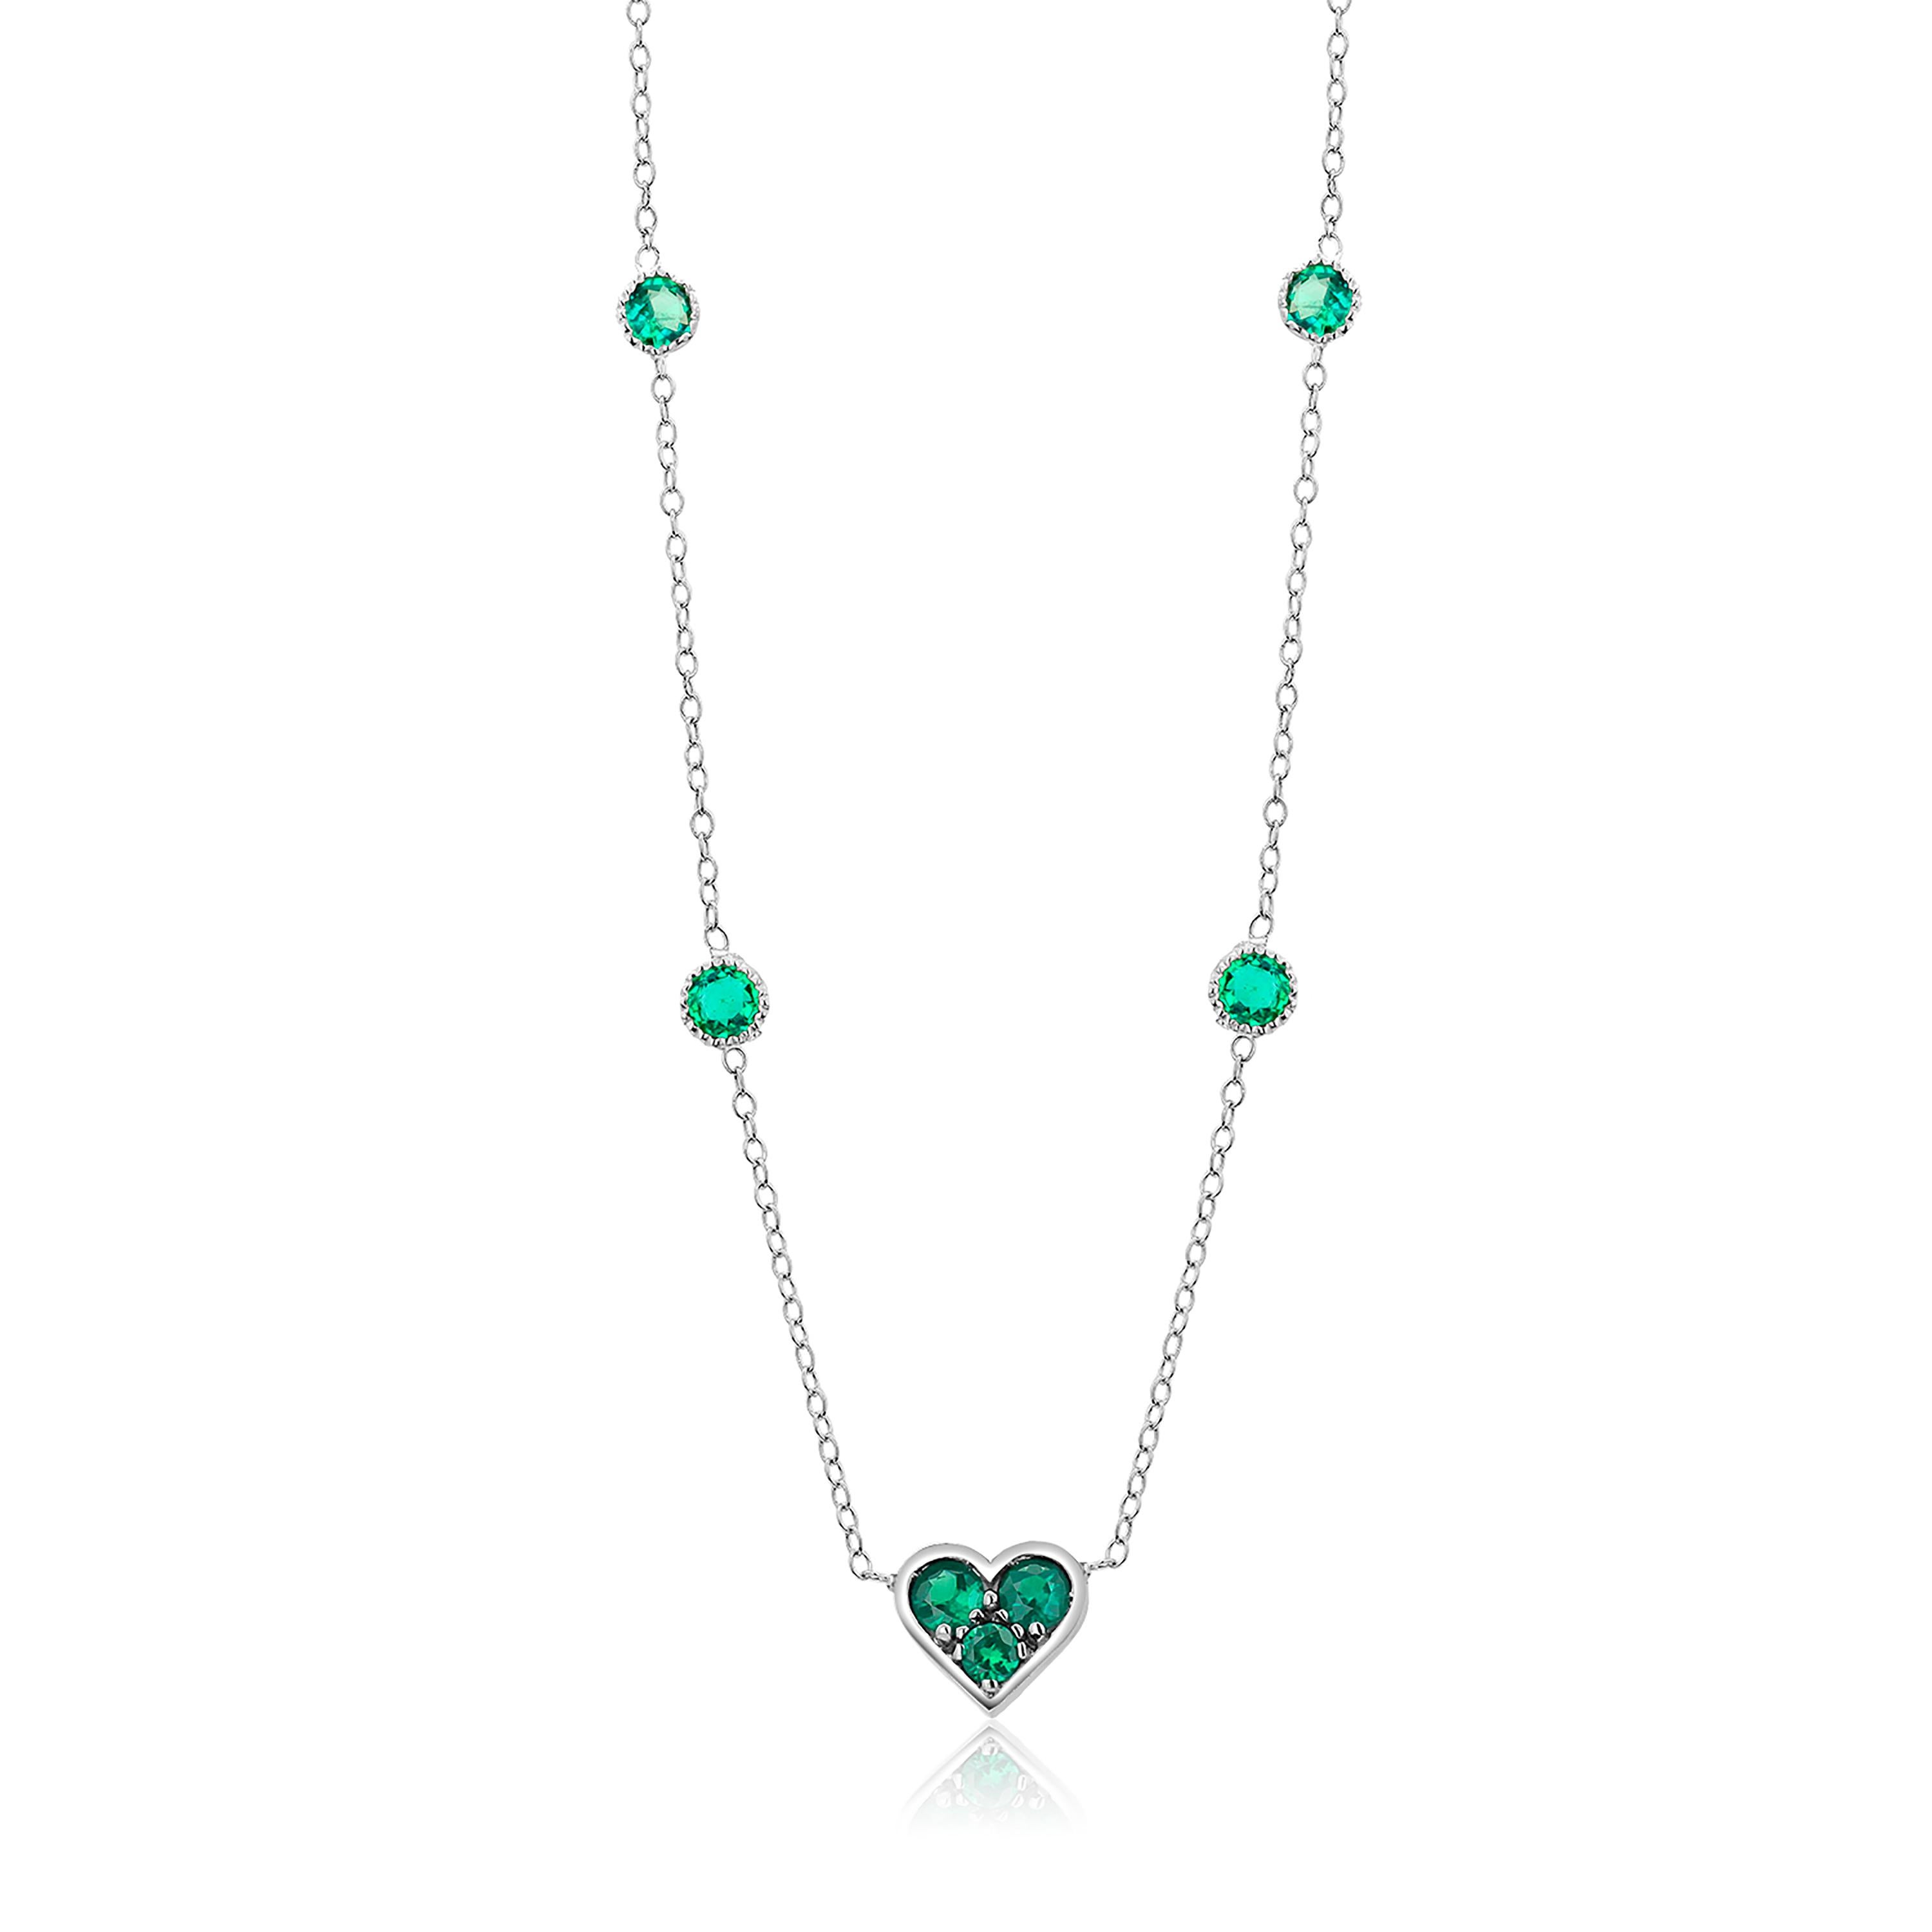 Round Cut Heart Shaped Emerald Charm Four Bezel Emerald Stations Gold Necklace Pendant